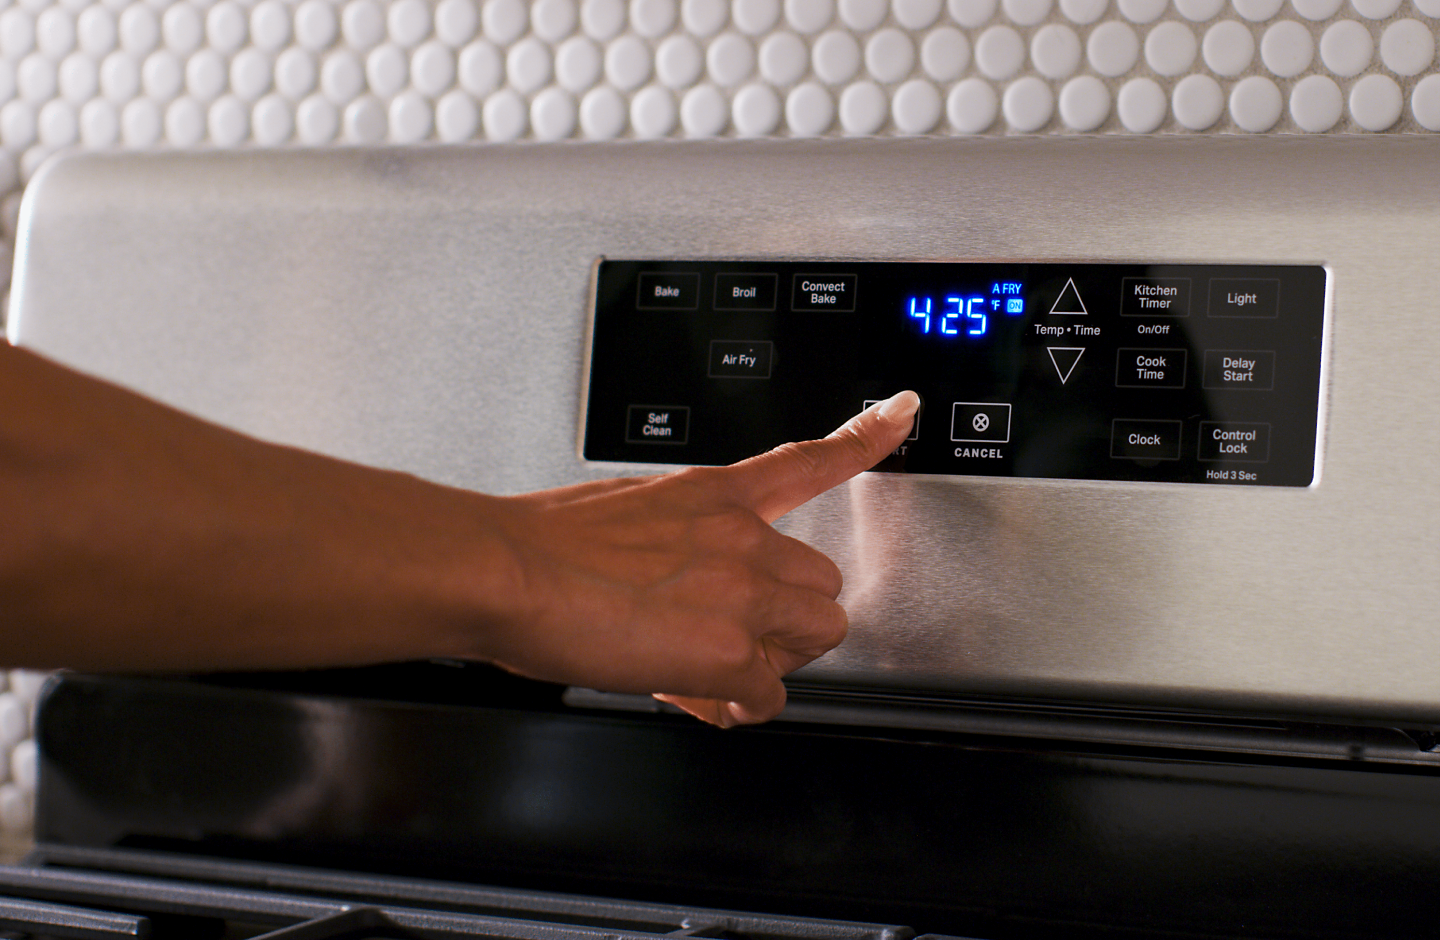 How to check your oven's temperature, and what to do if it's off